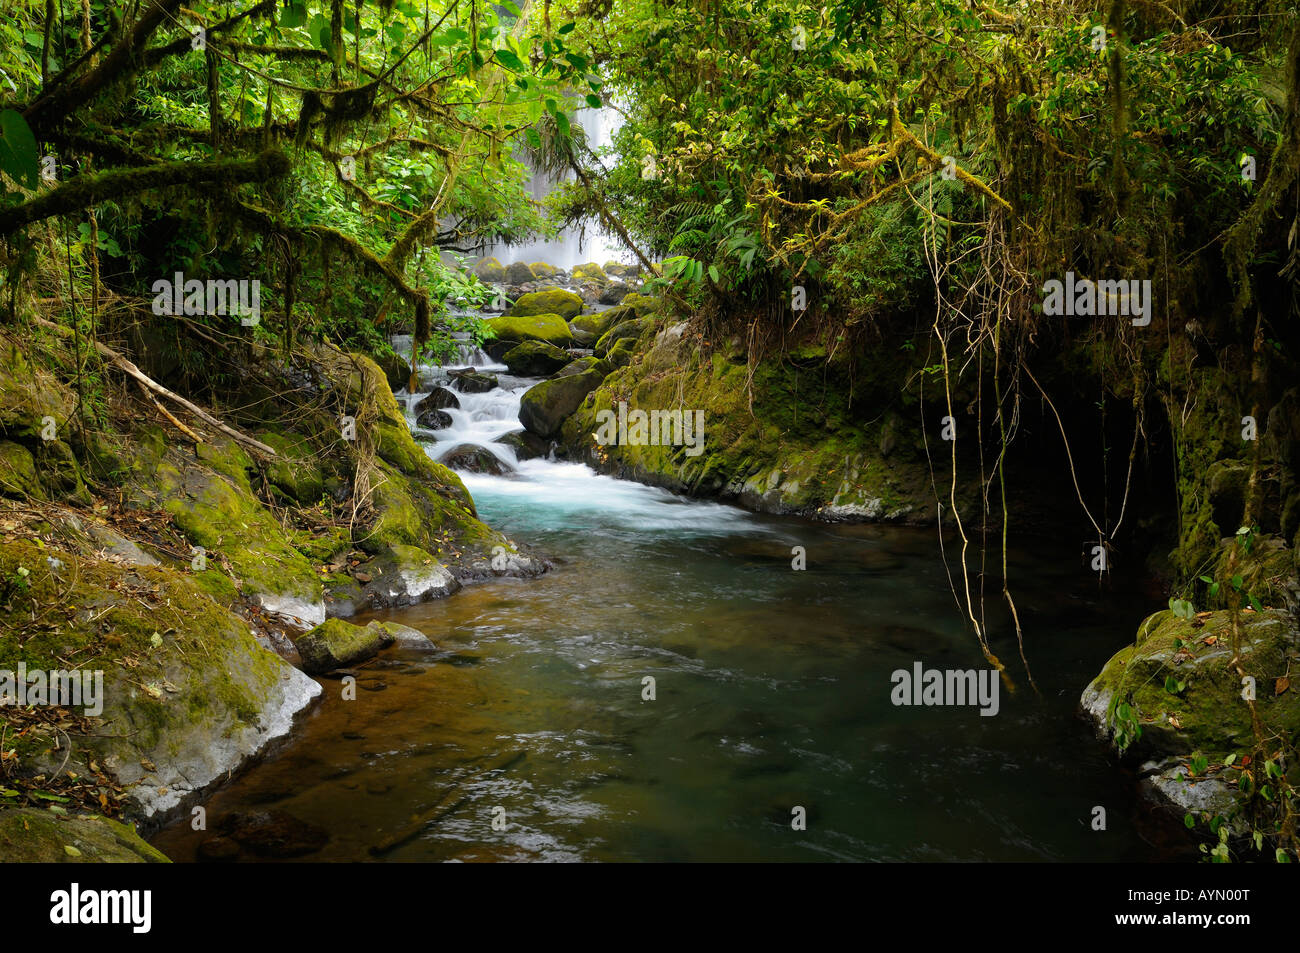 Thick tropical rainforest jungle and stream with waterfall at Poas volcano La Paz Gardens Costa Rica Stock Photo